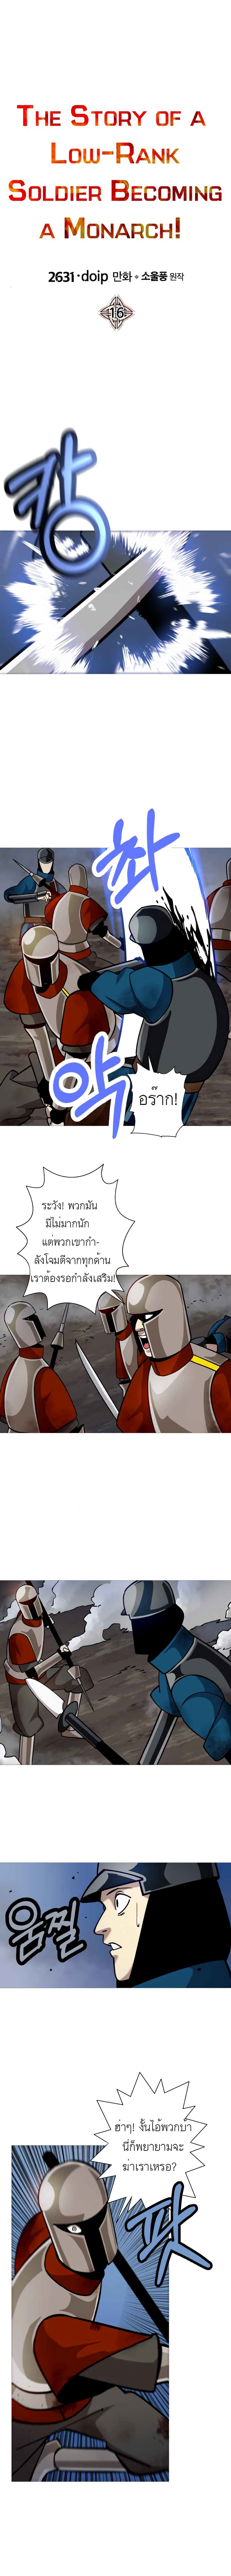 The Story of a Low-Rank Soldier Becoming a Monarch - หน้า 1